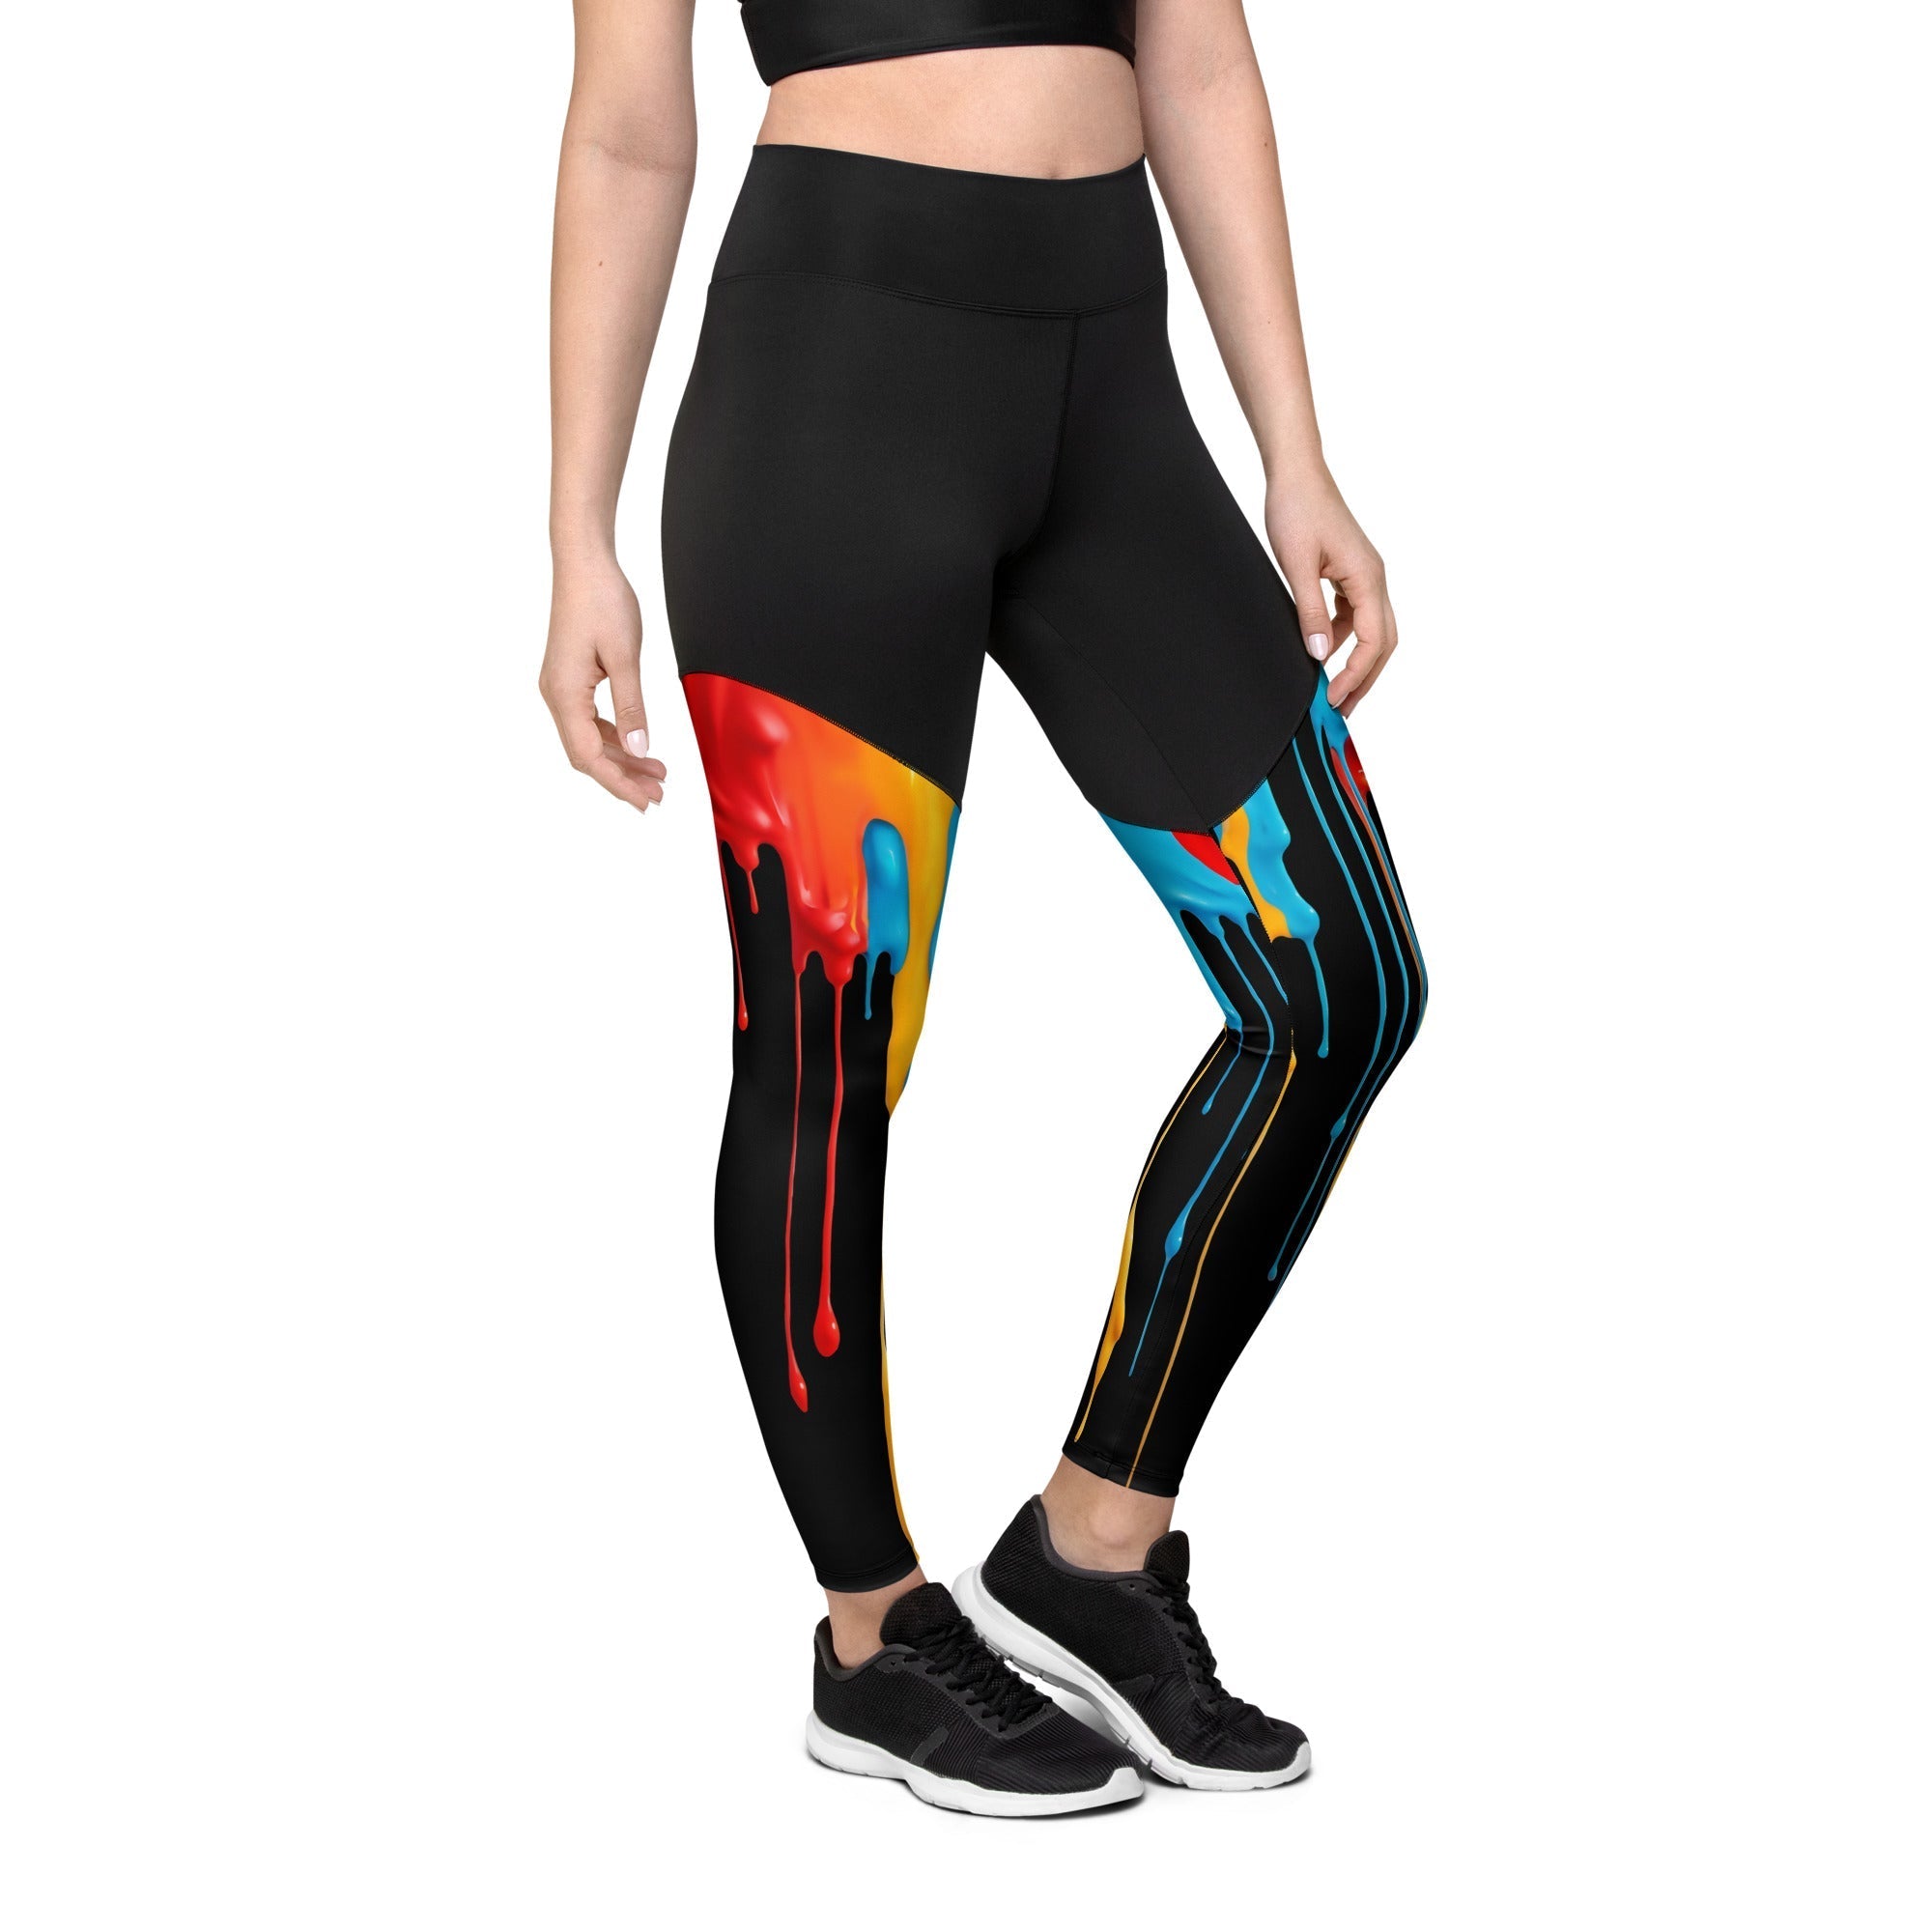 Dripping Color Compression Leggings